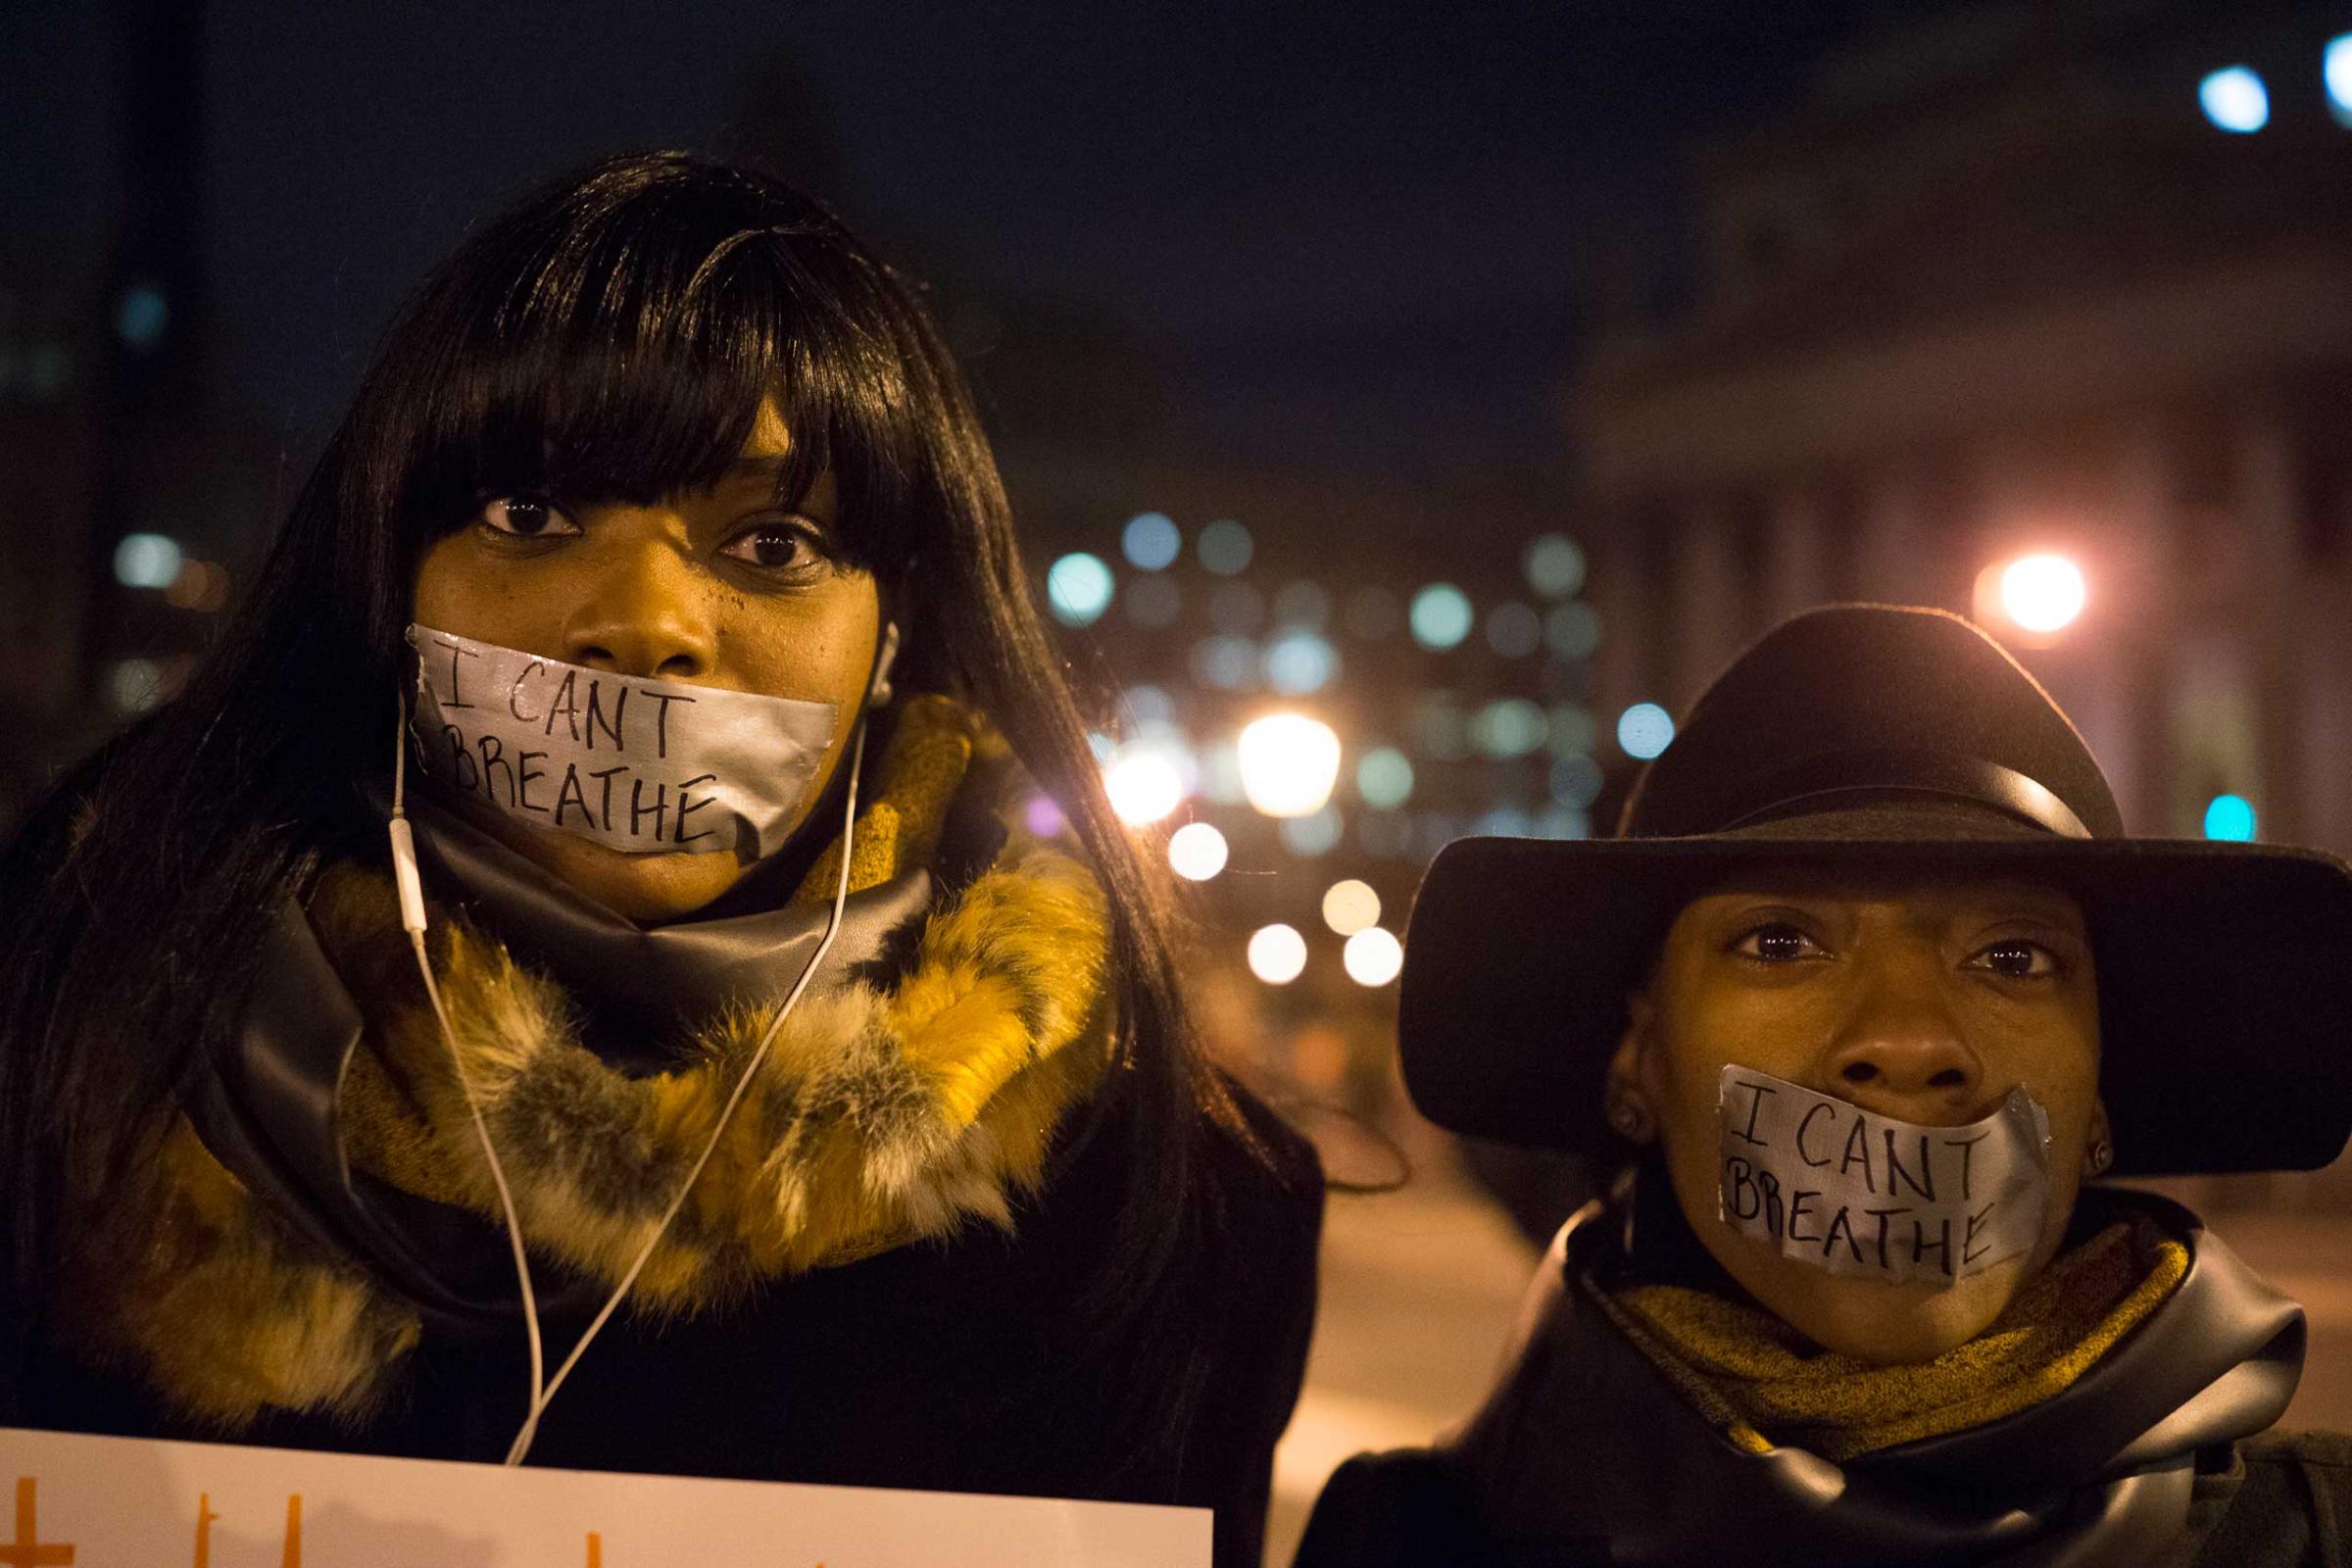 Thousands of protestors came out to demonstrate against police brutality in new York City on Dec. 13, 2014.